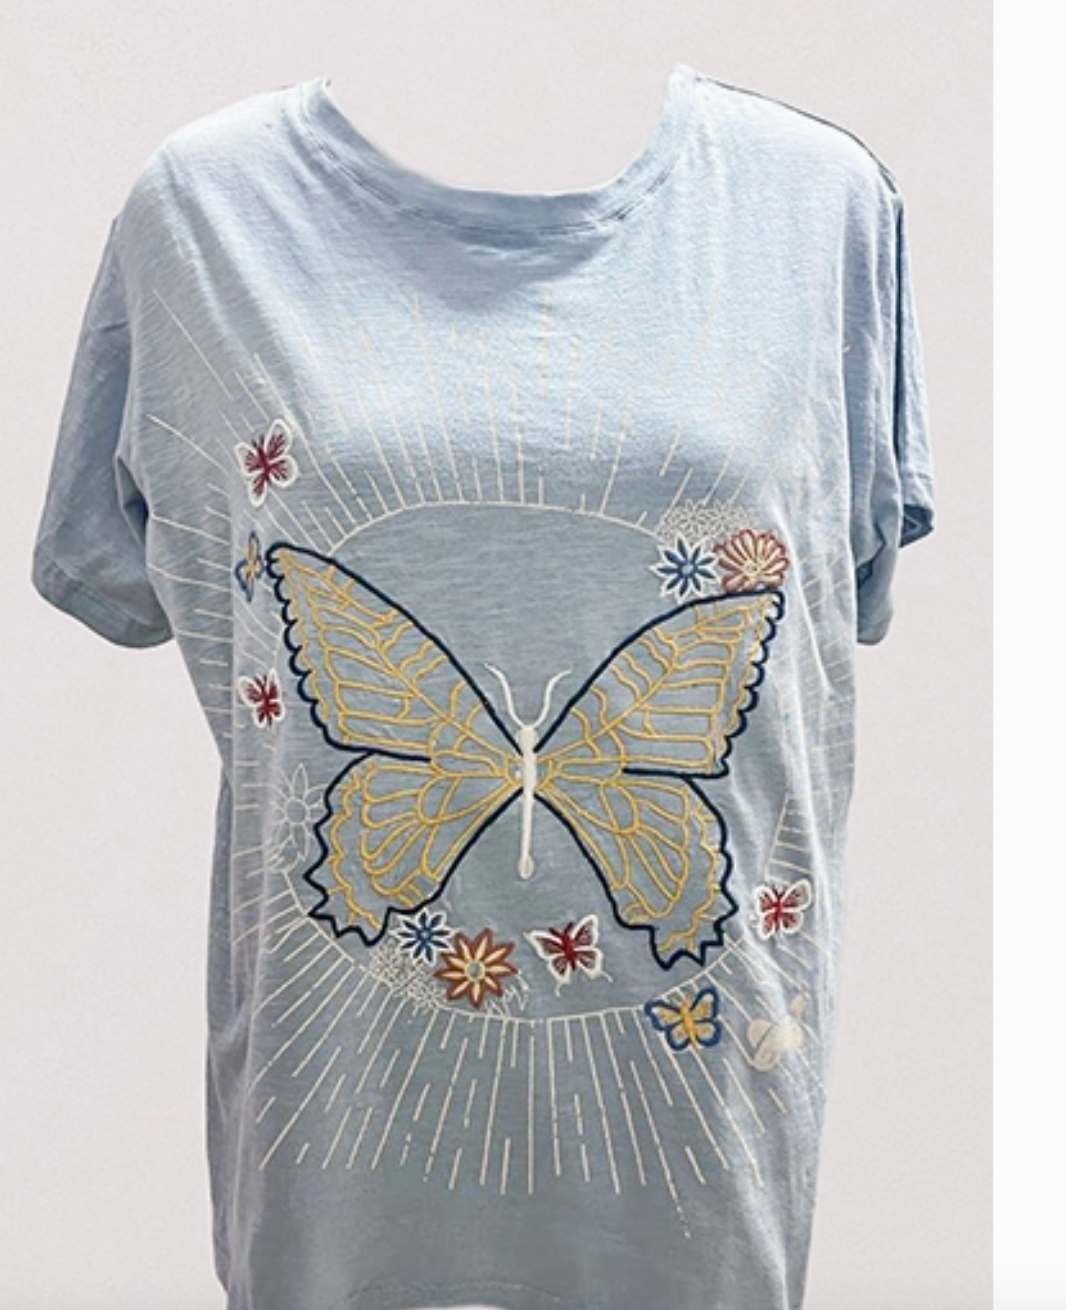 Beautiful embroidered butterfly t-shirt